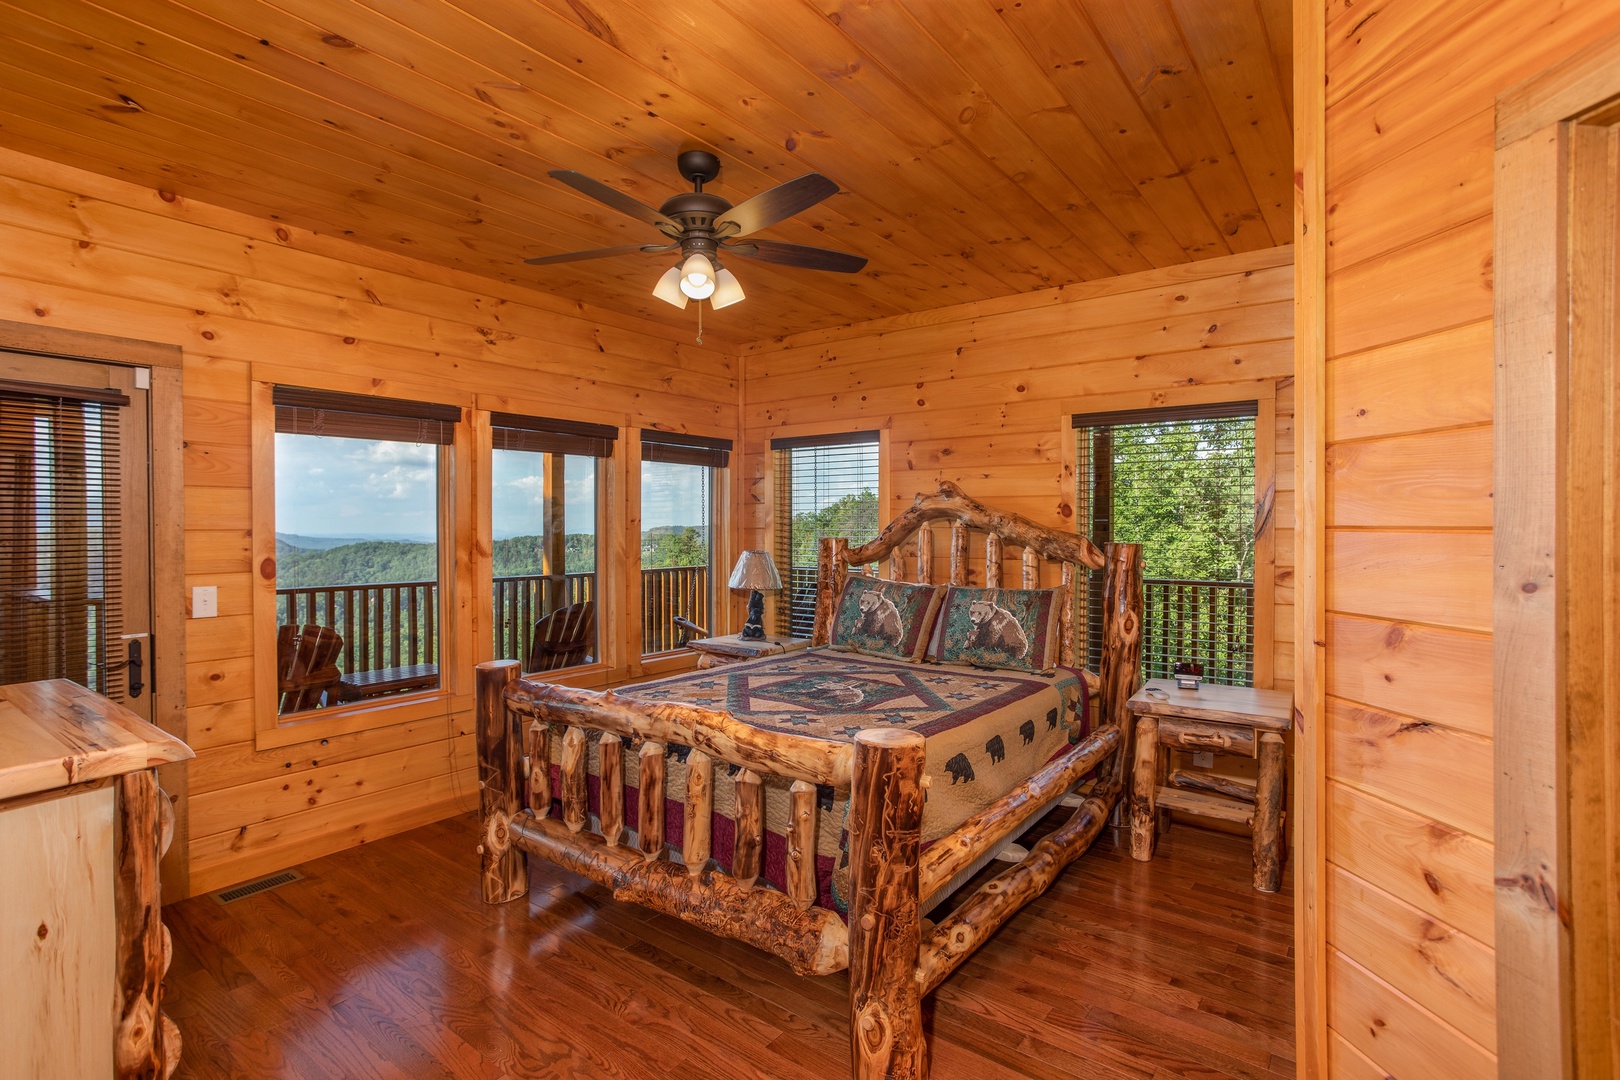 Bedroom with a log bed at Four Seasons Palace, a 5-bedroom cabin rental located in Pigeon Forge